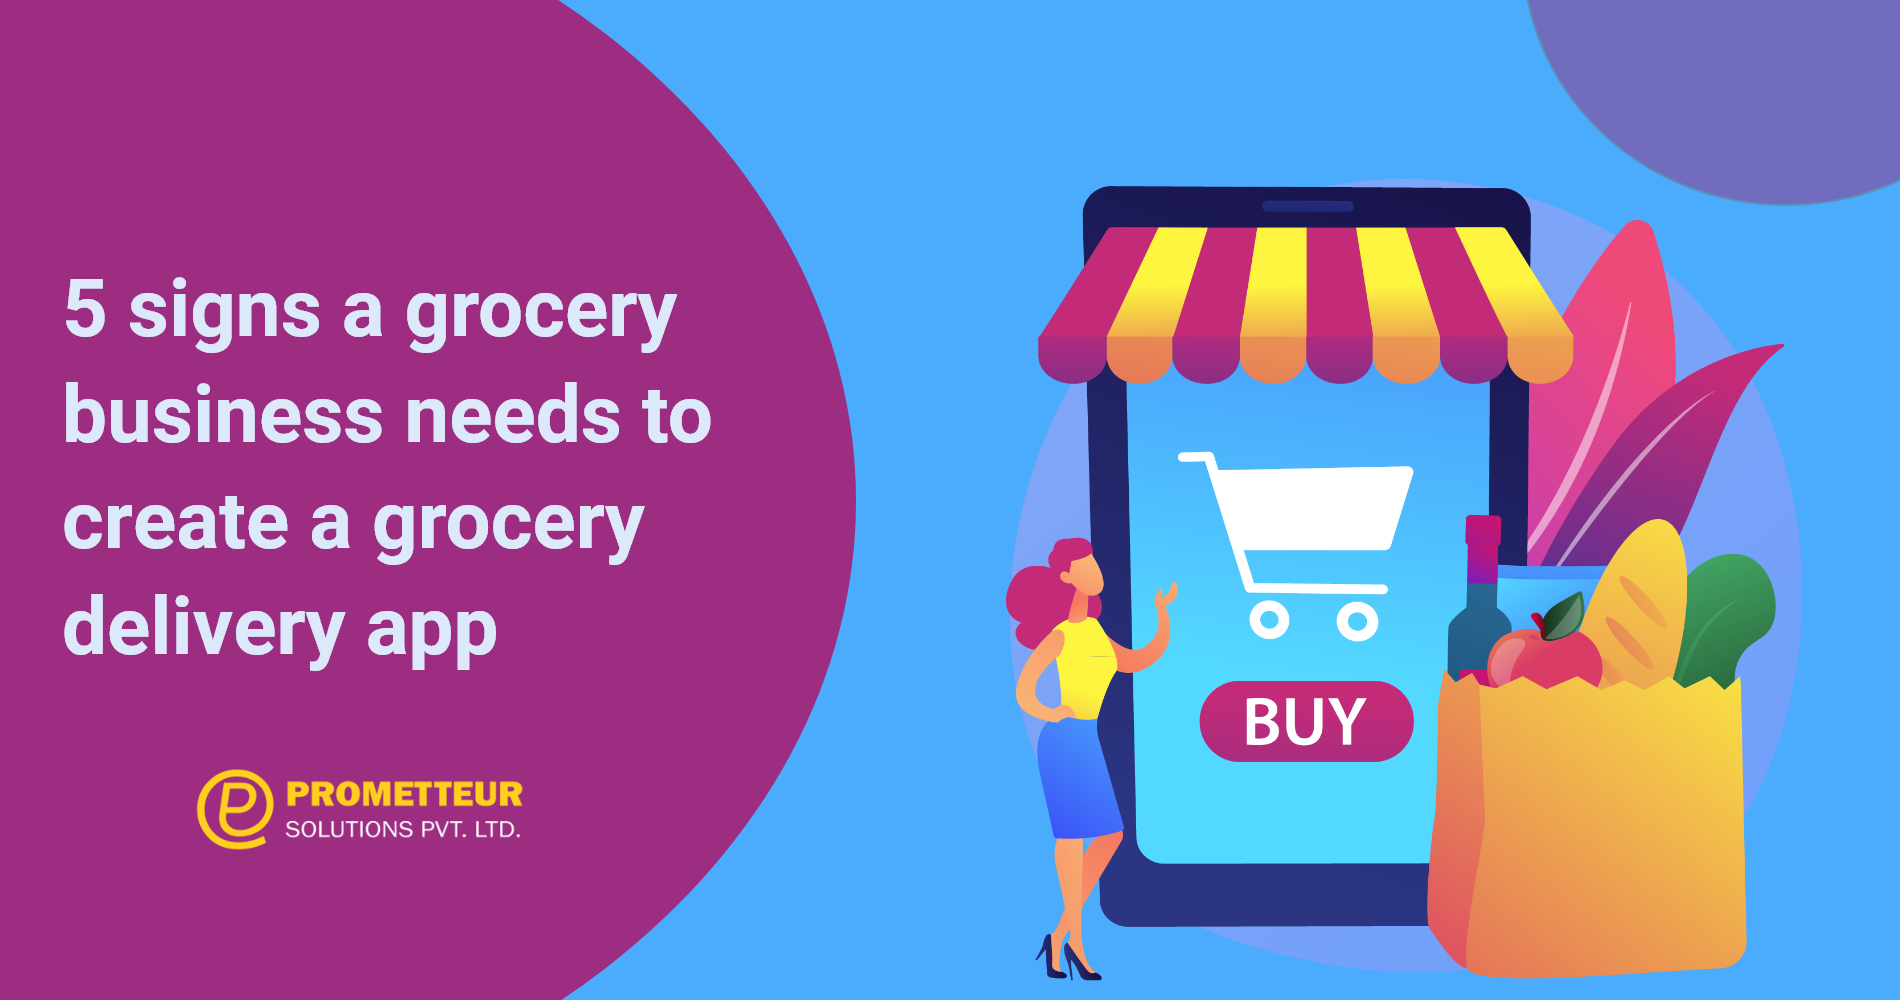 5 SIGNS YOU NEED A GROCERY DELIVERY APP FOR YOUR BUSINESS